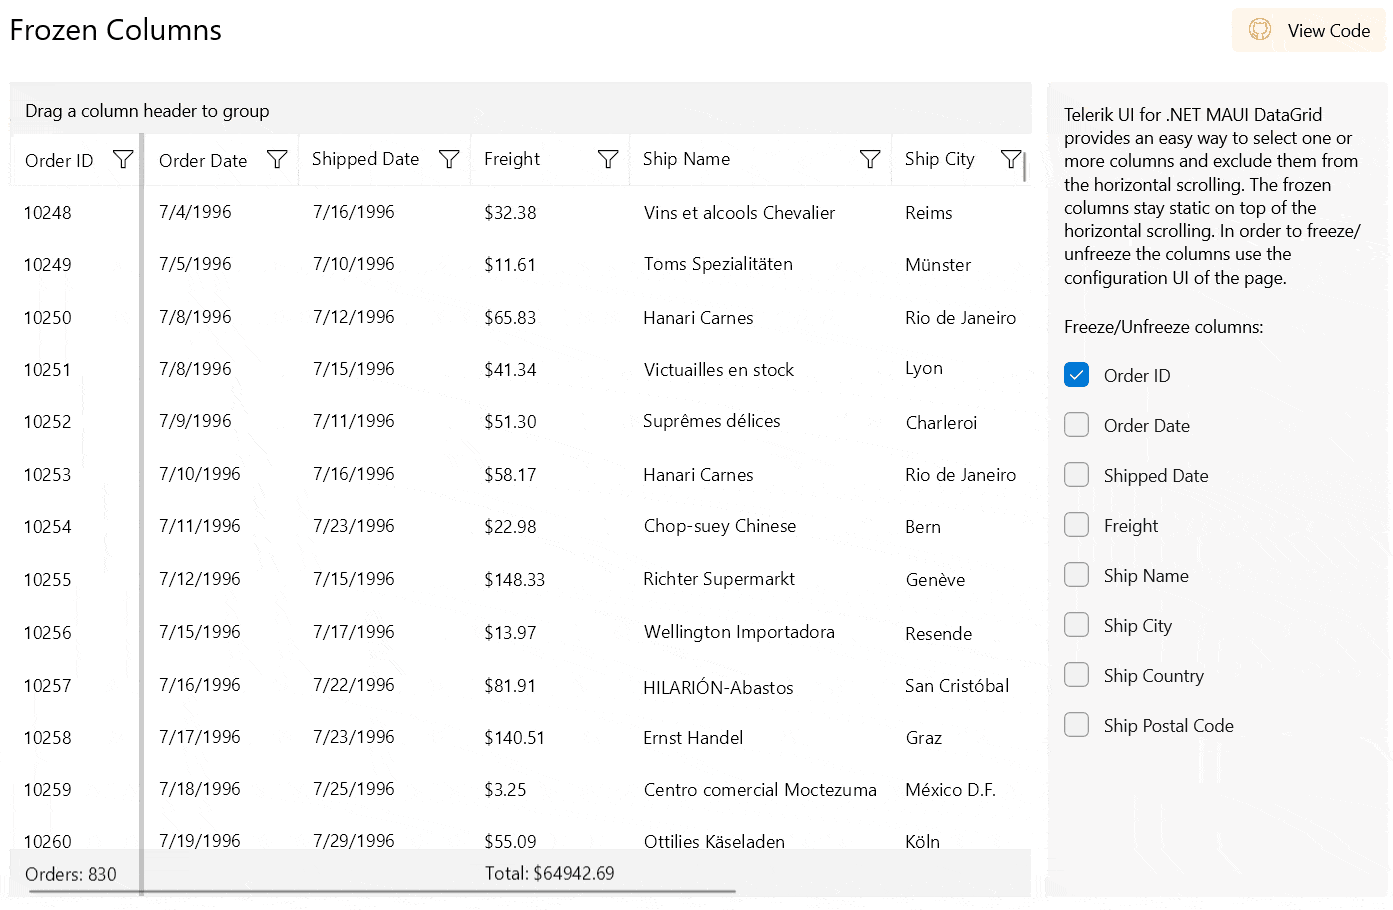 User can select multiple columns to freeze